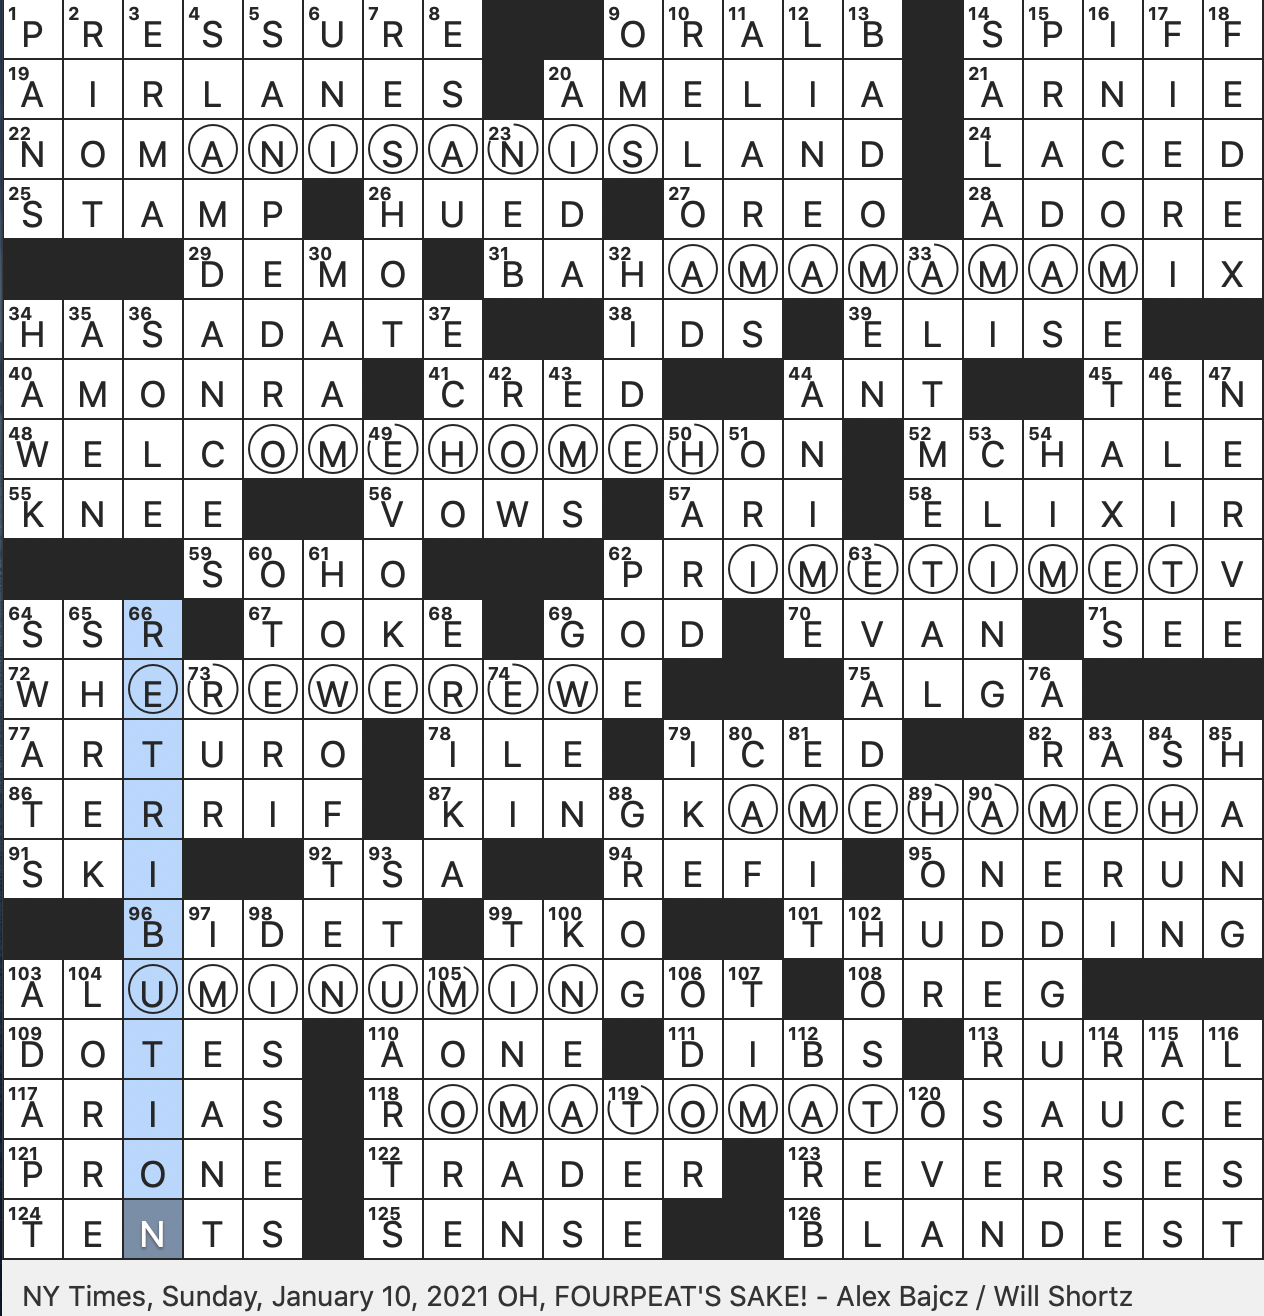 Rex Parker Does The Nyt Crossword Puzzle Sea Urchin At A Sushi Bar Sun 1 10 21 Overnighting Option Classic Saying Originated By John Donne Oscar 1987 Peace Nobelist From